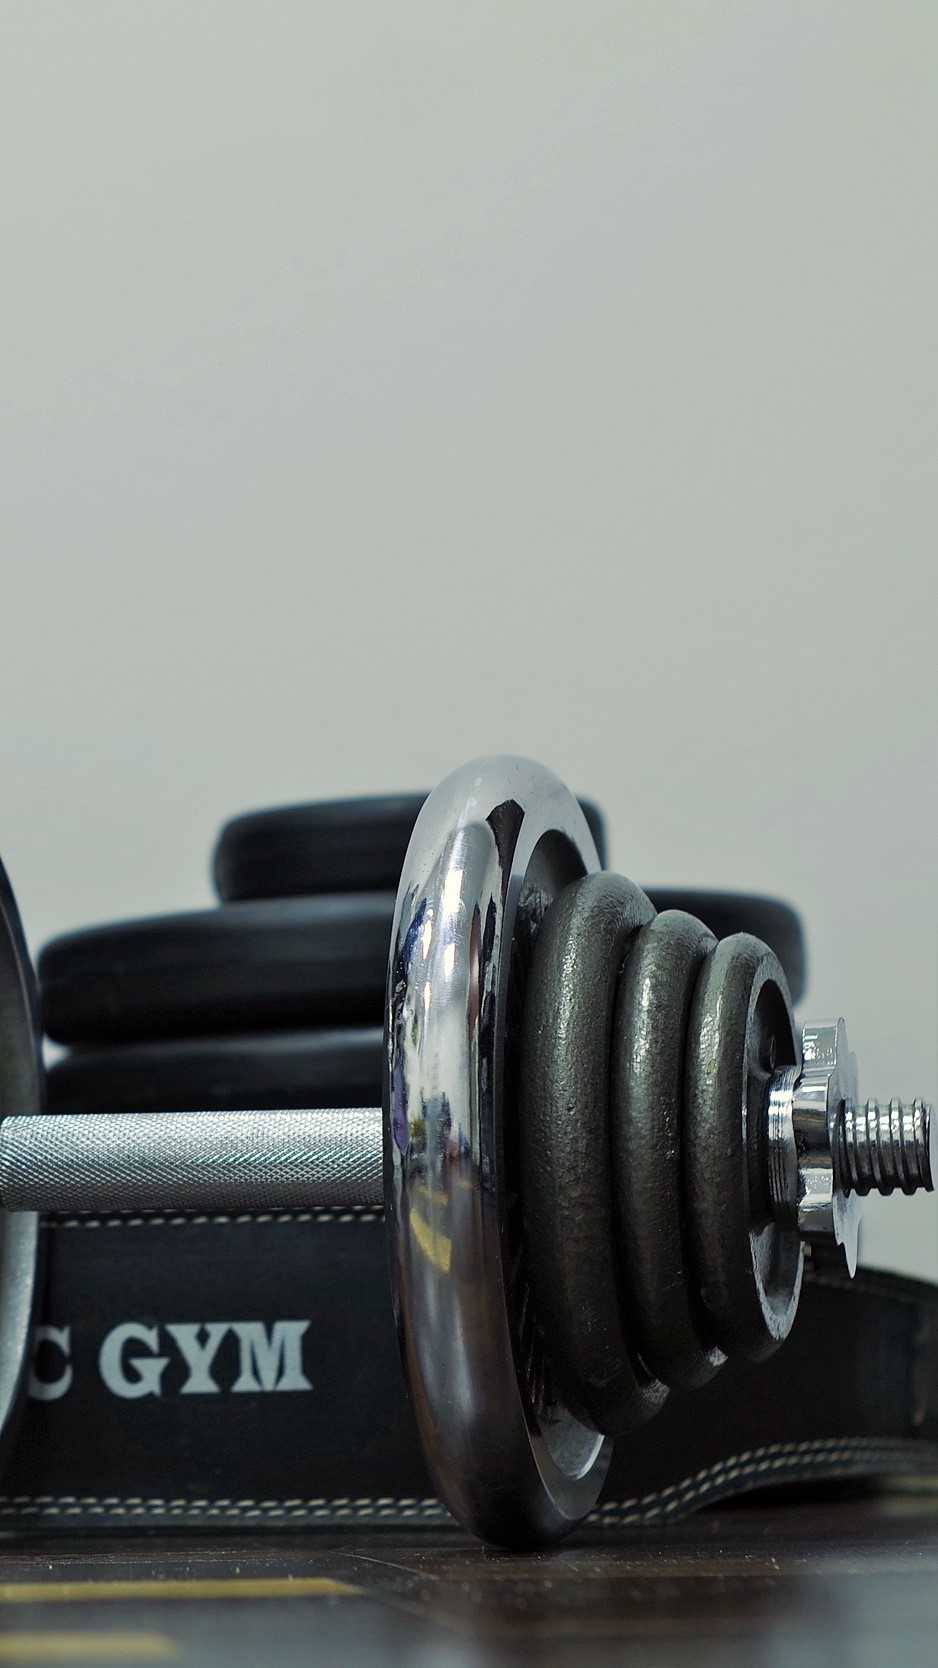 100+] Gym Iphone Wallpapers | Wallpapers.com